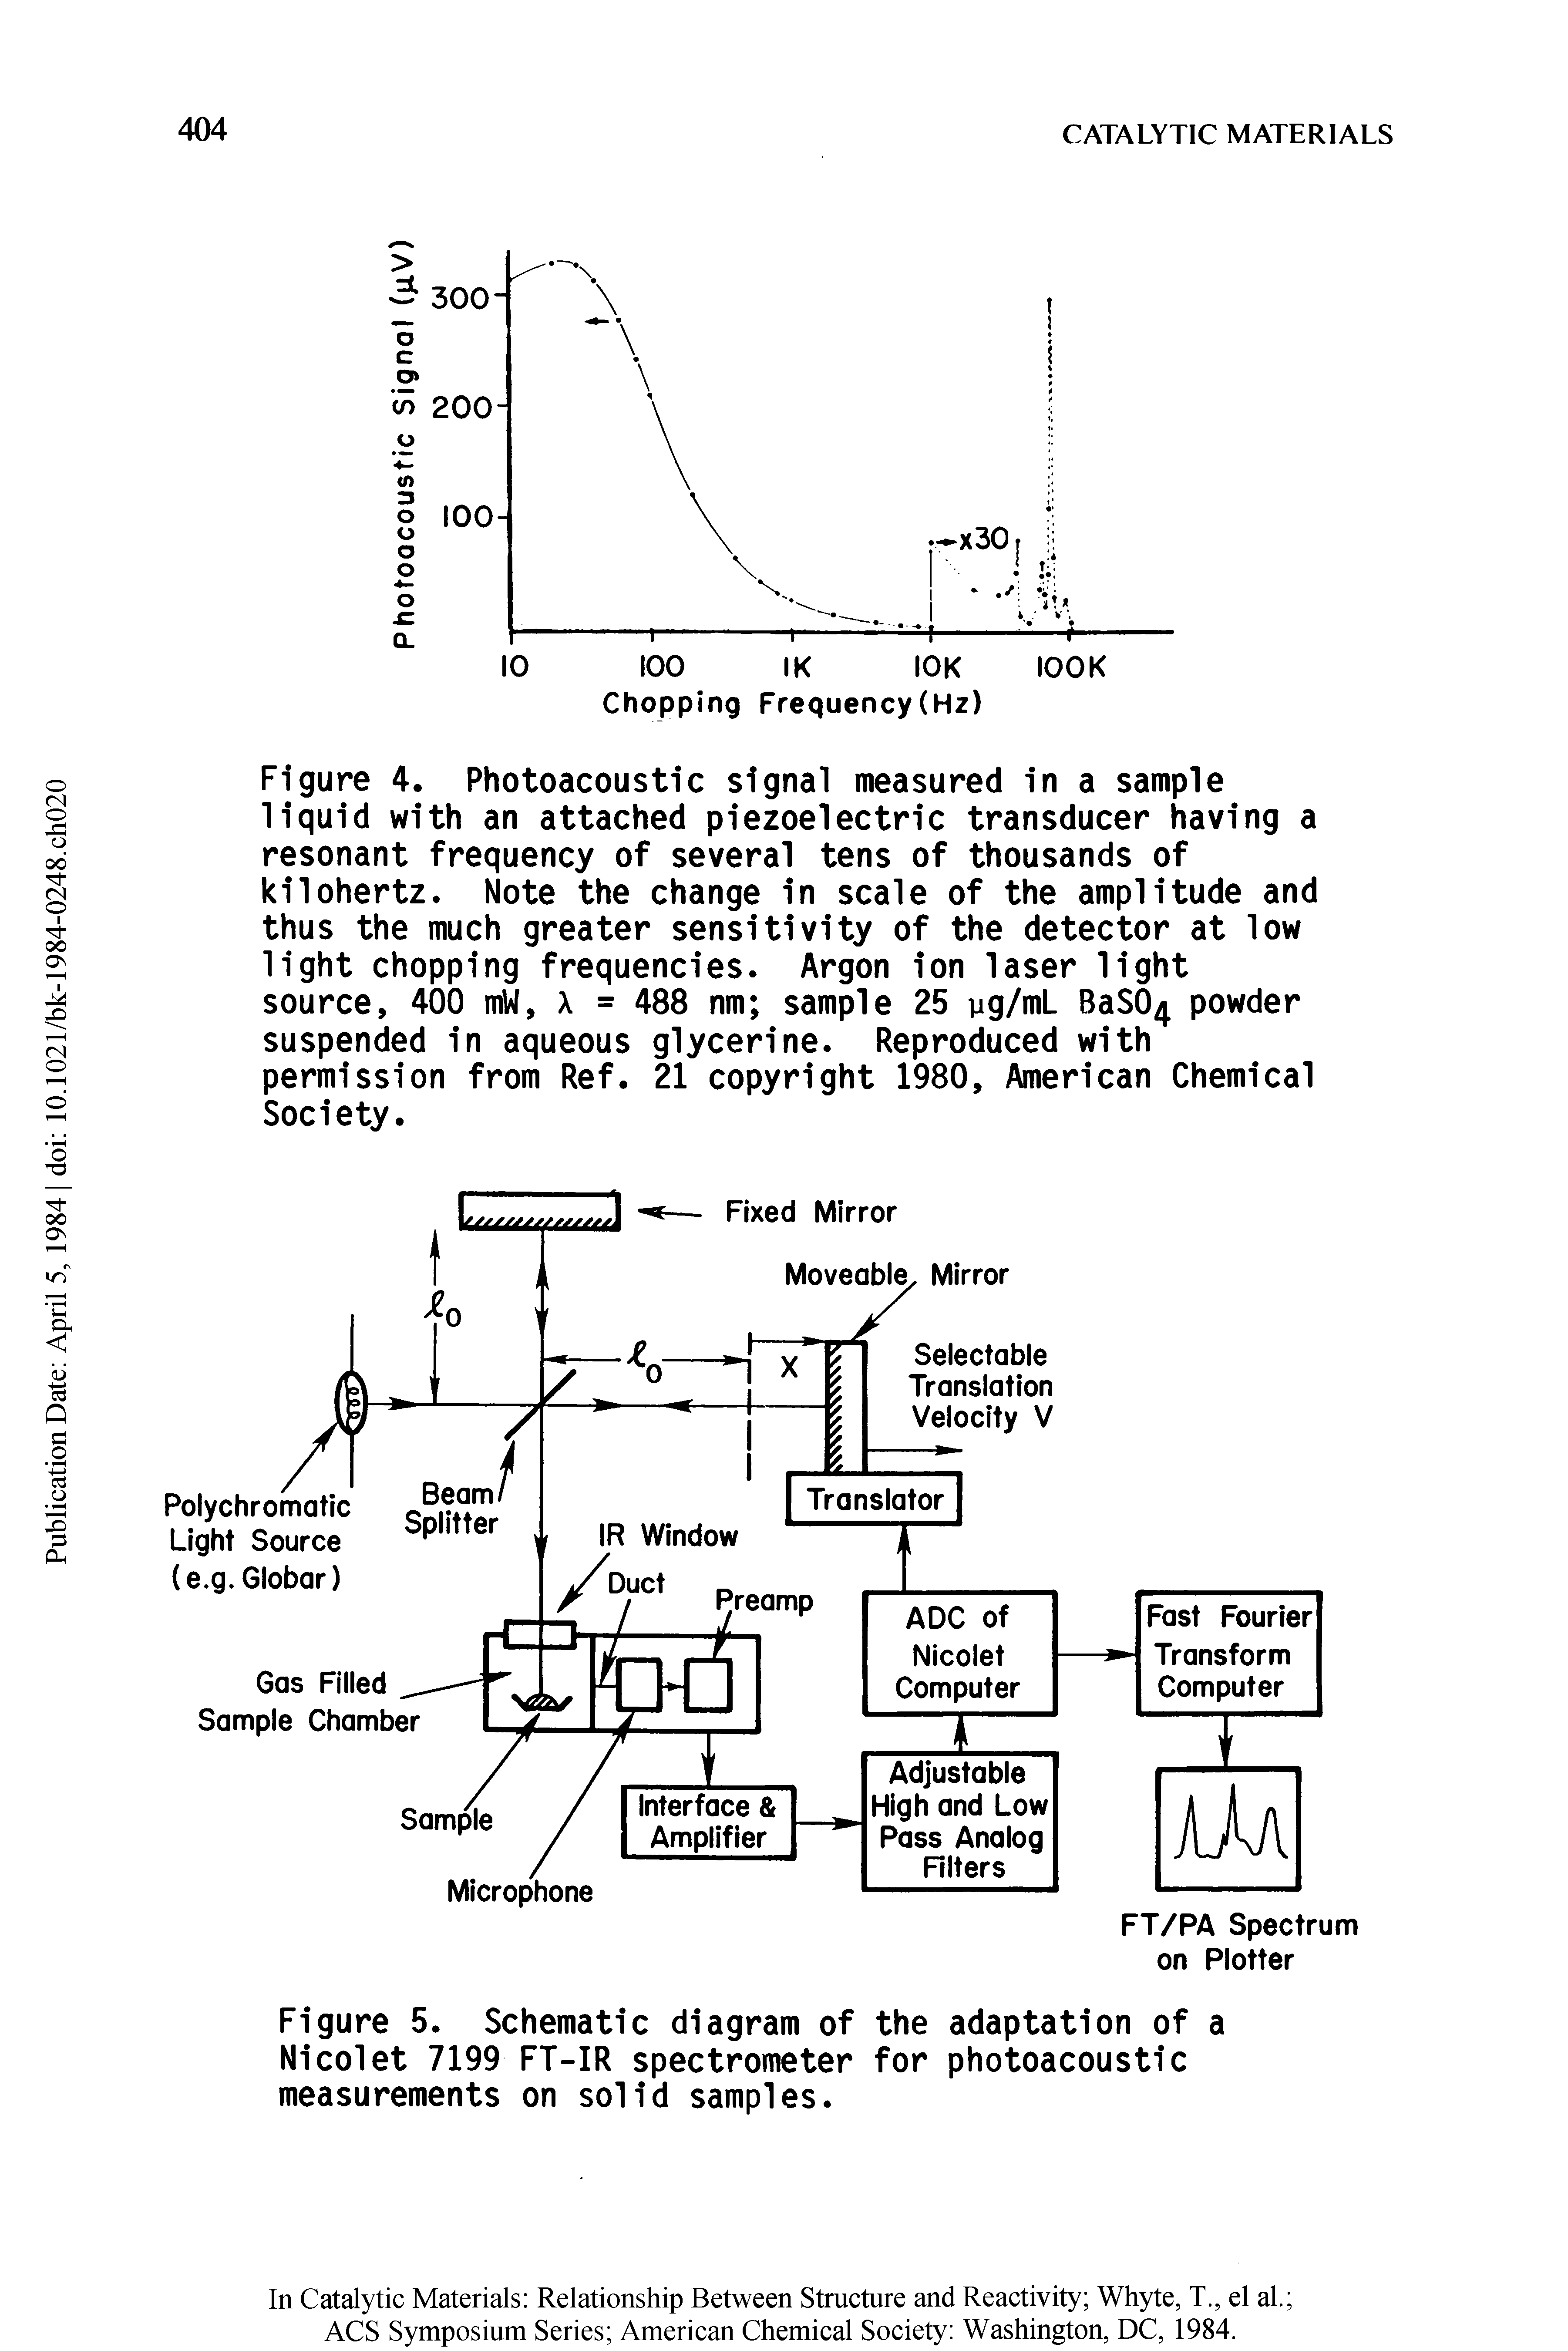 Figure 5. Schematic diagram of the adaptation of a Nicolet 7199 FT-IR spectrometer for photoacoustic measurements on solid samples.